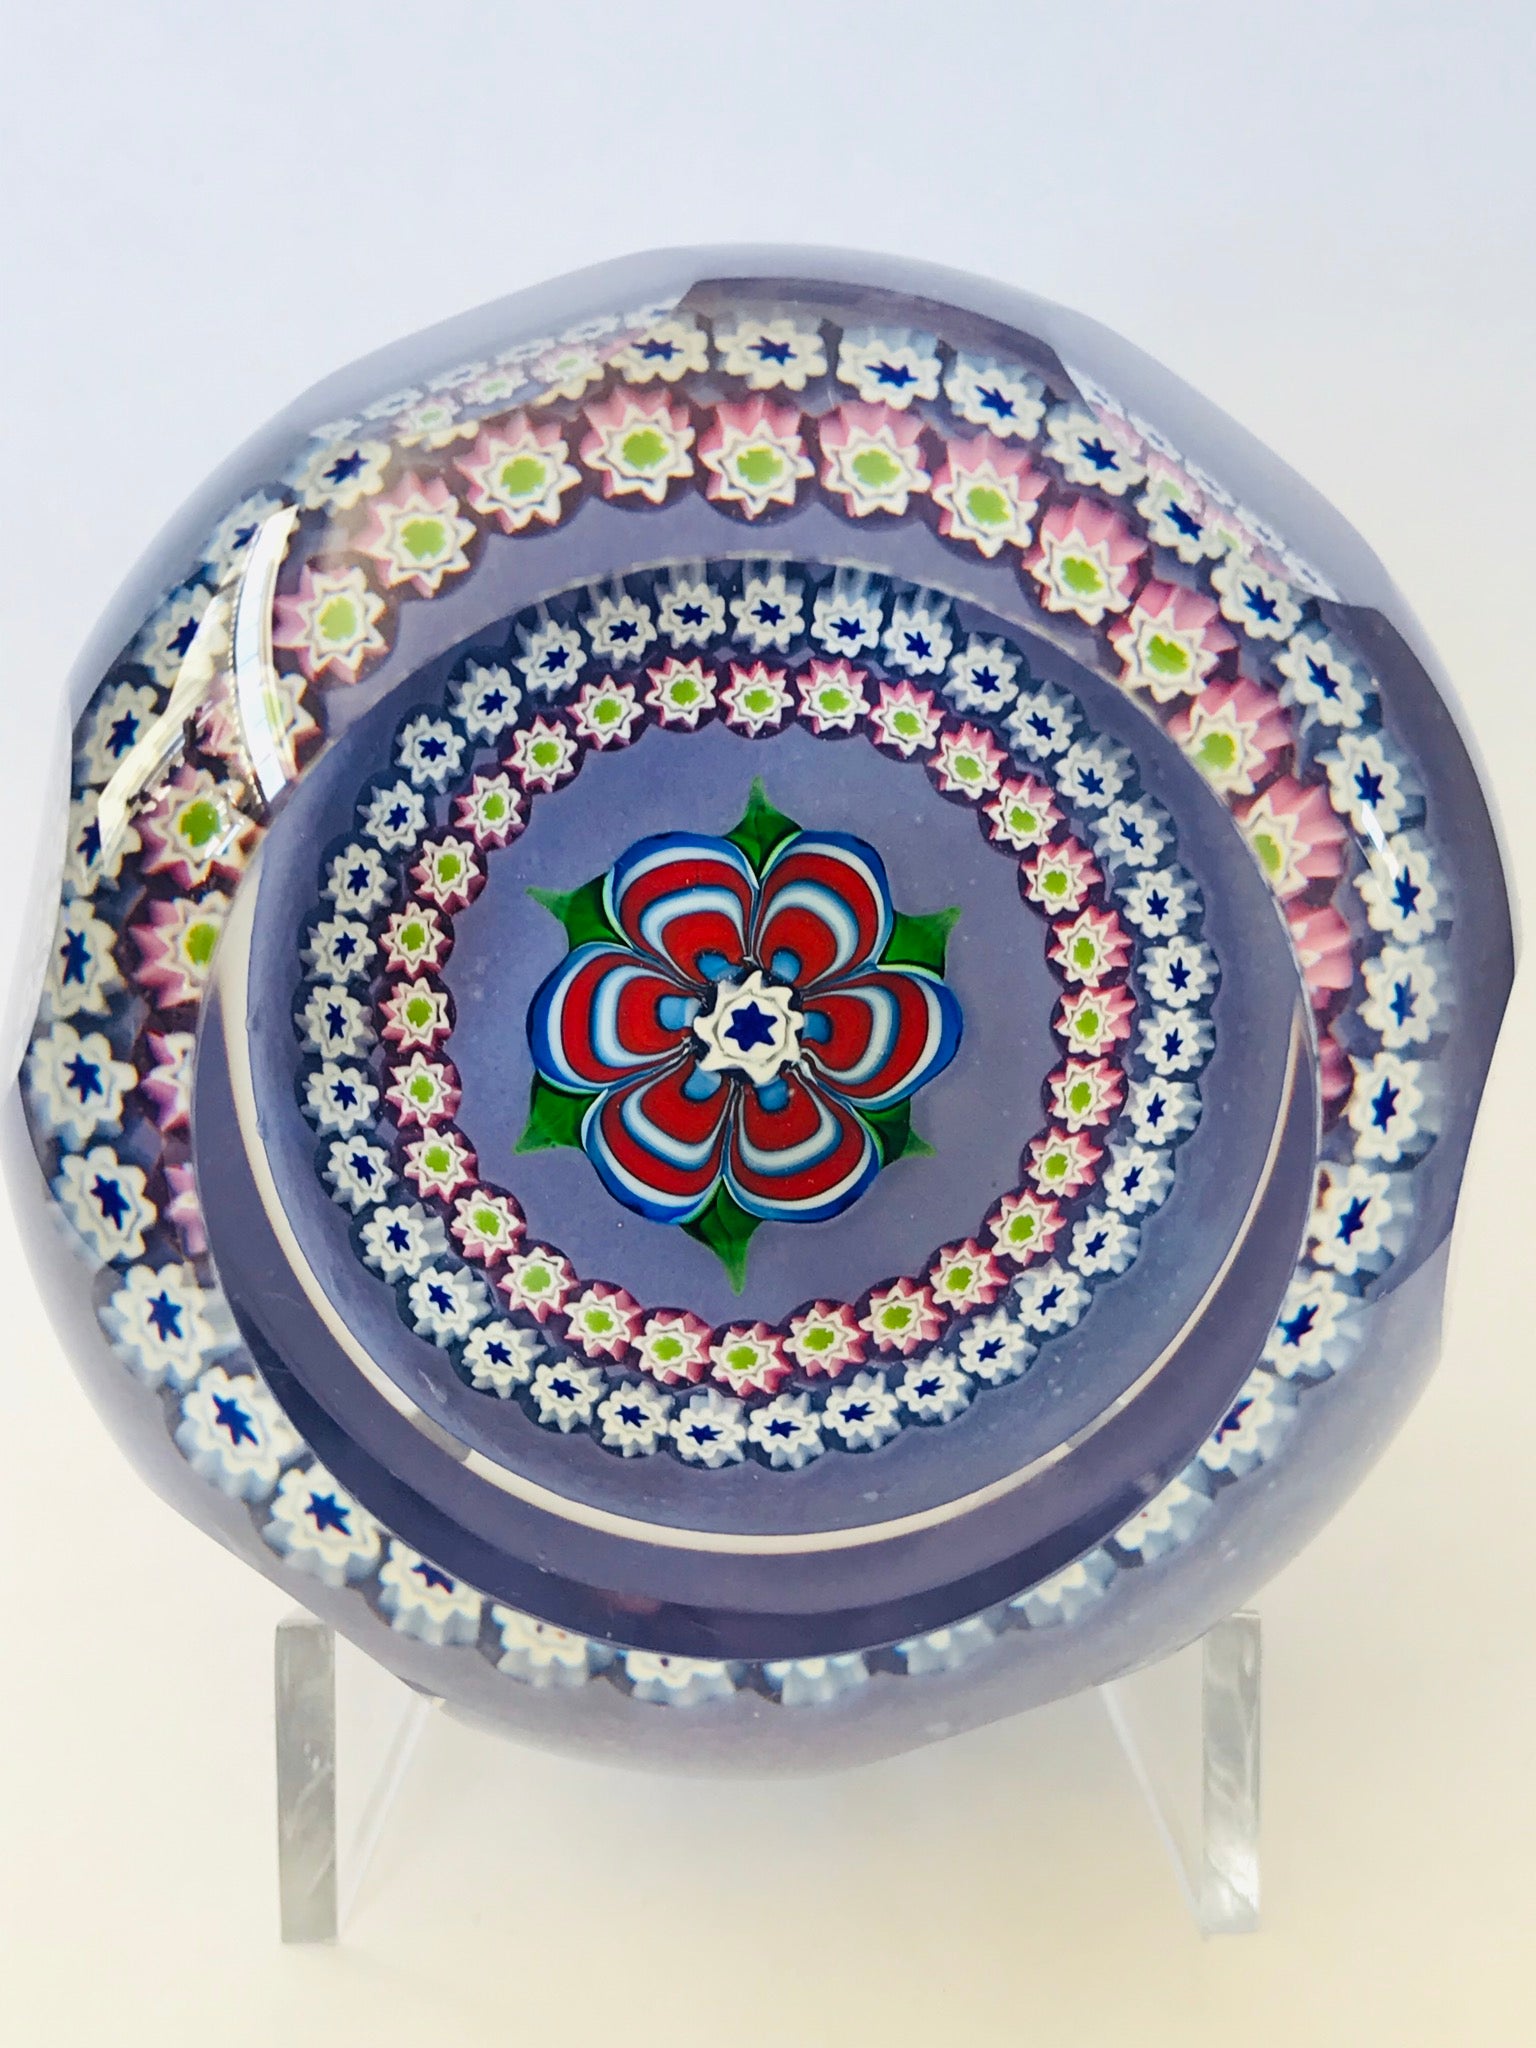 Whitefriars Caithness “Floriana” Paperweight LE 86/250